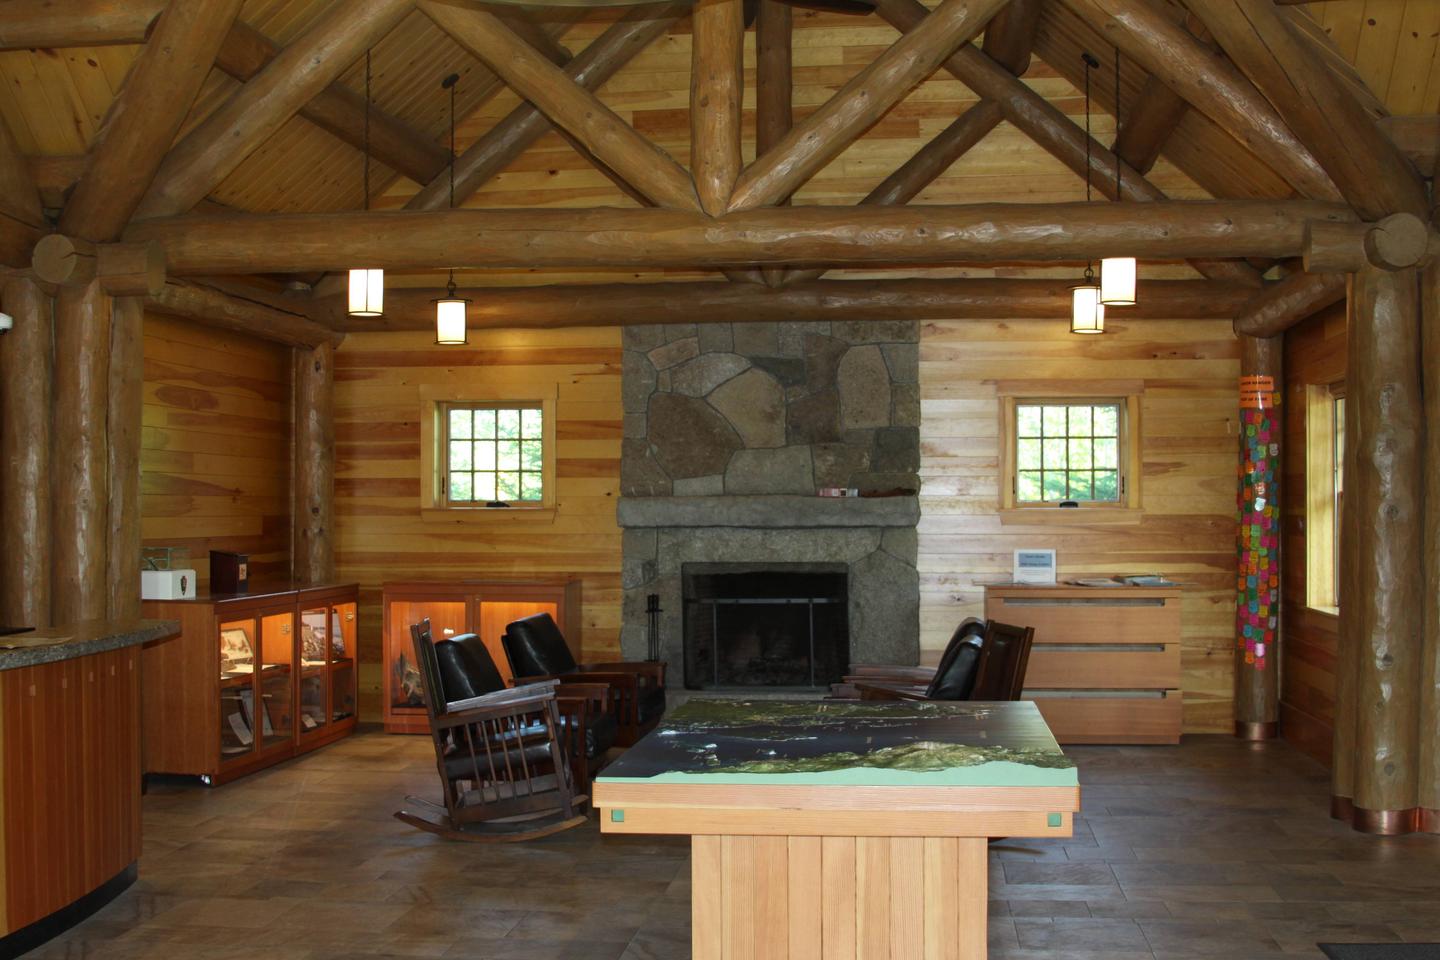 Interior of log cabin ranger station with stone fireplace, rocking chairs, and wildlife displays.Inside Schoodic Woods Ranger Station (Photo 2 of 2)